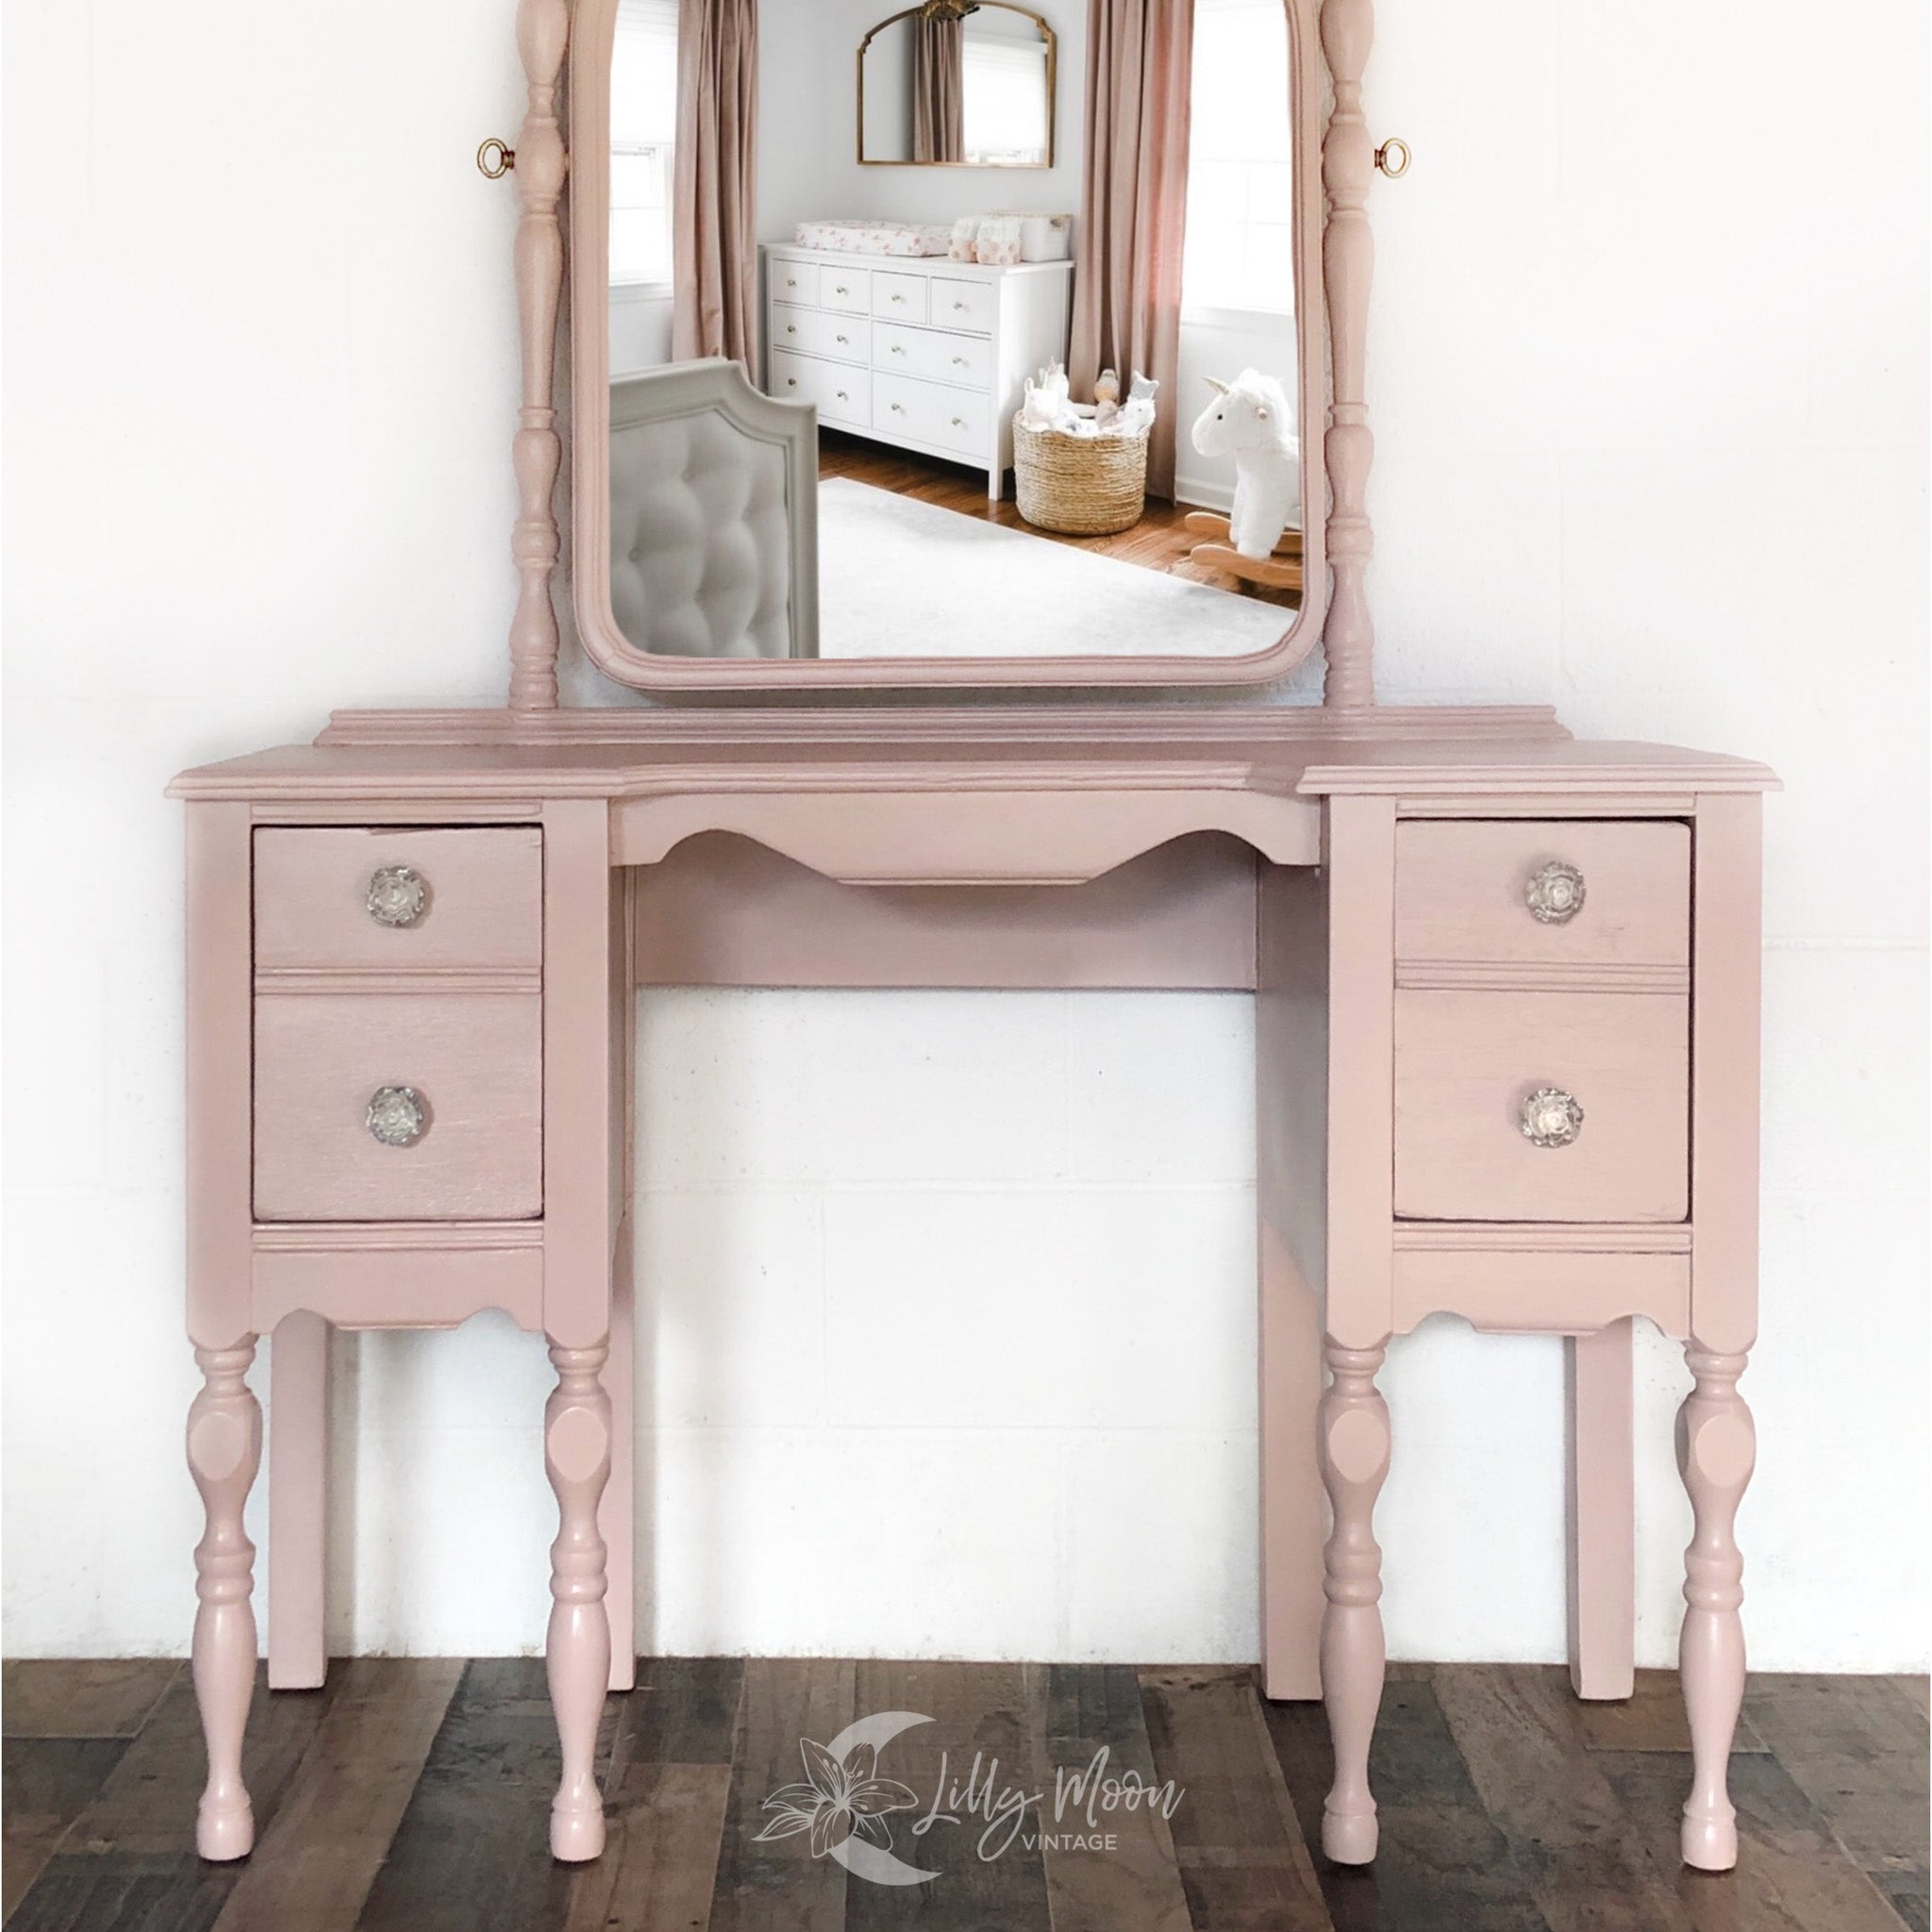 A vintage vanity refurbished by Lilly Moon Vintage is painted in Dixie Belle's Tea Rose chalk mineral paint.